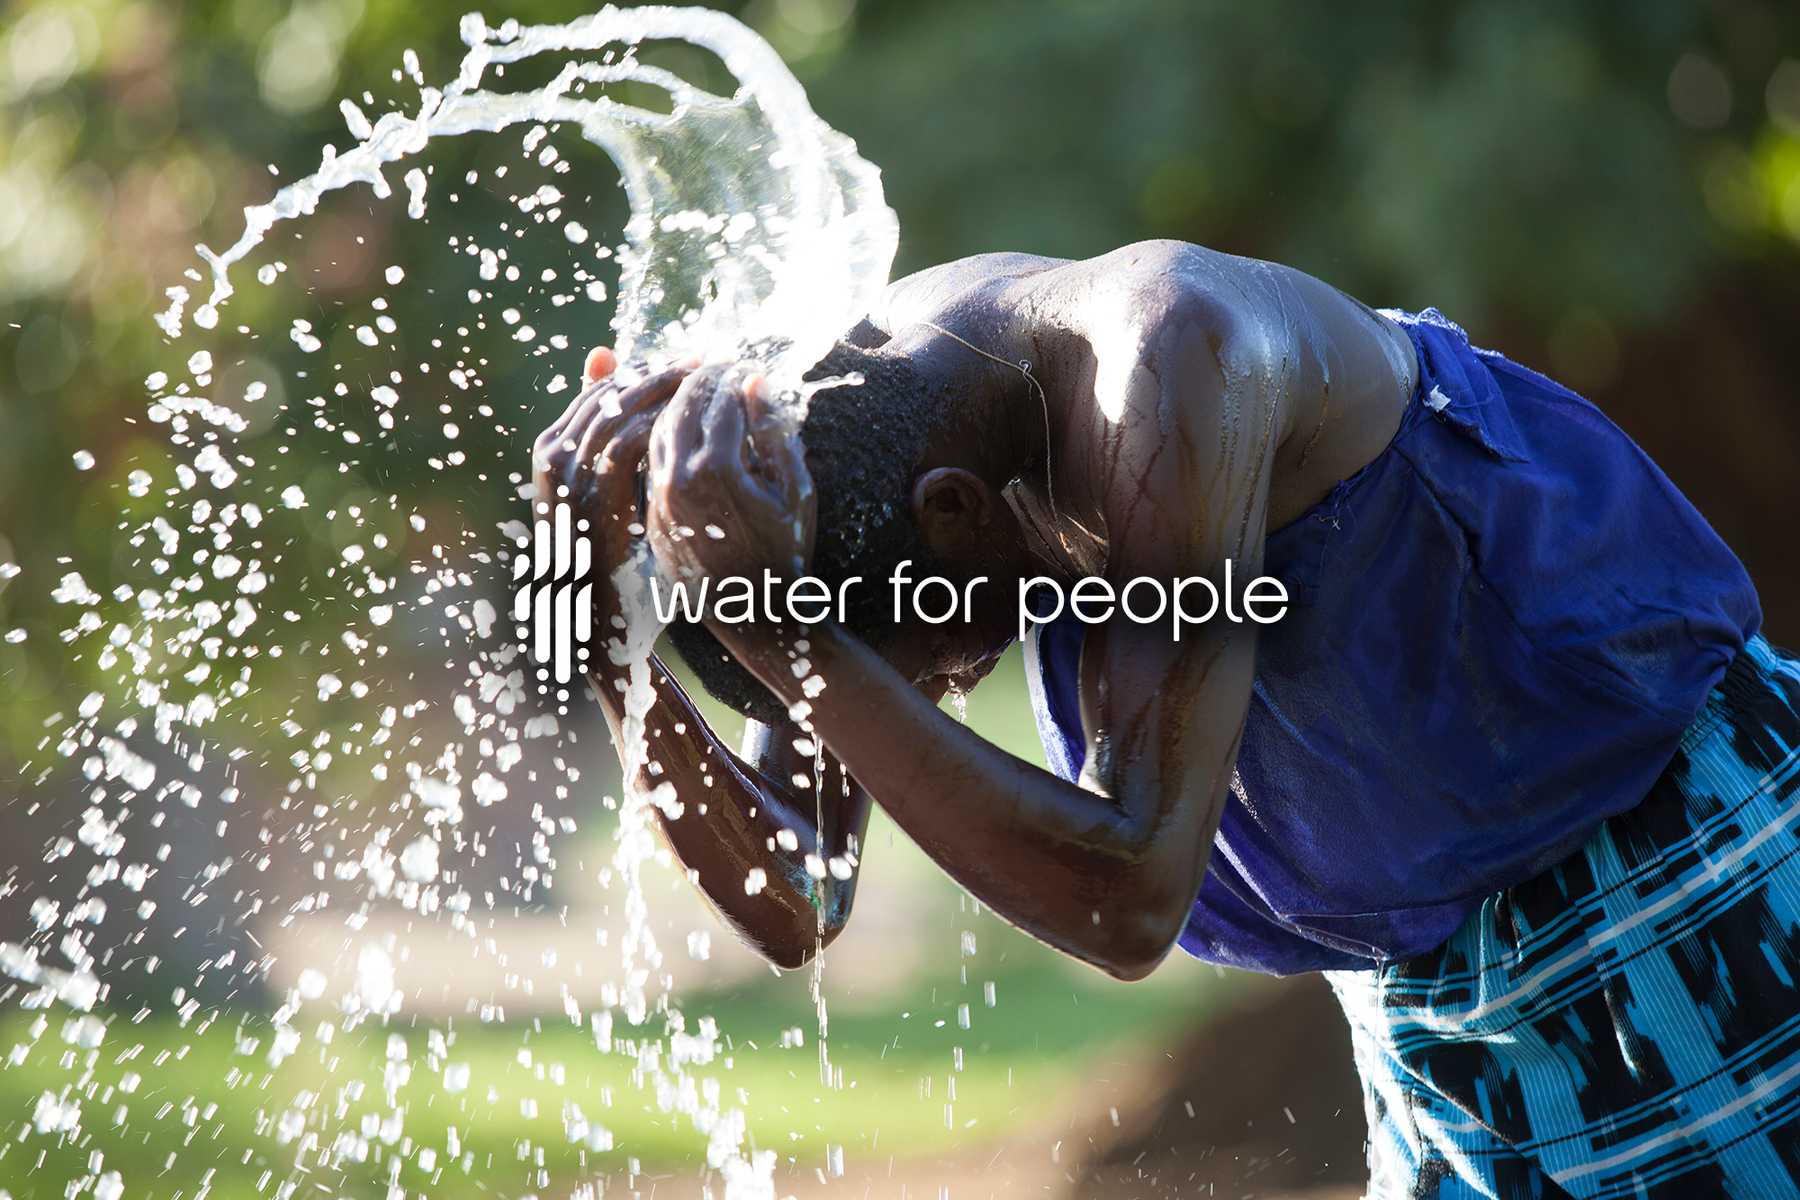 About Our Partners: Water For People